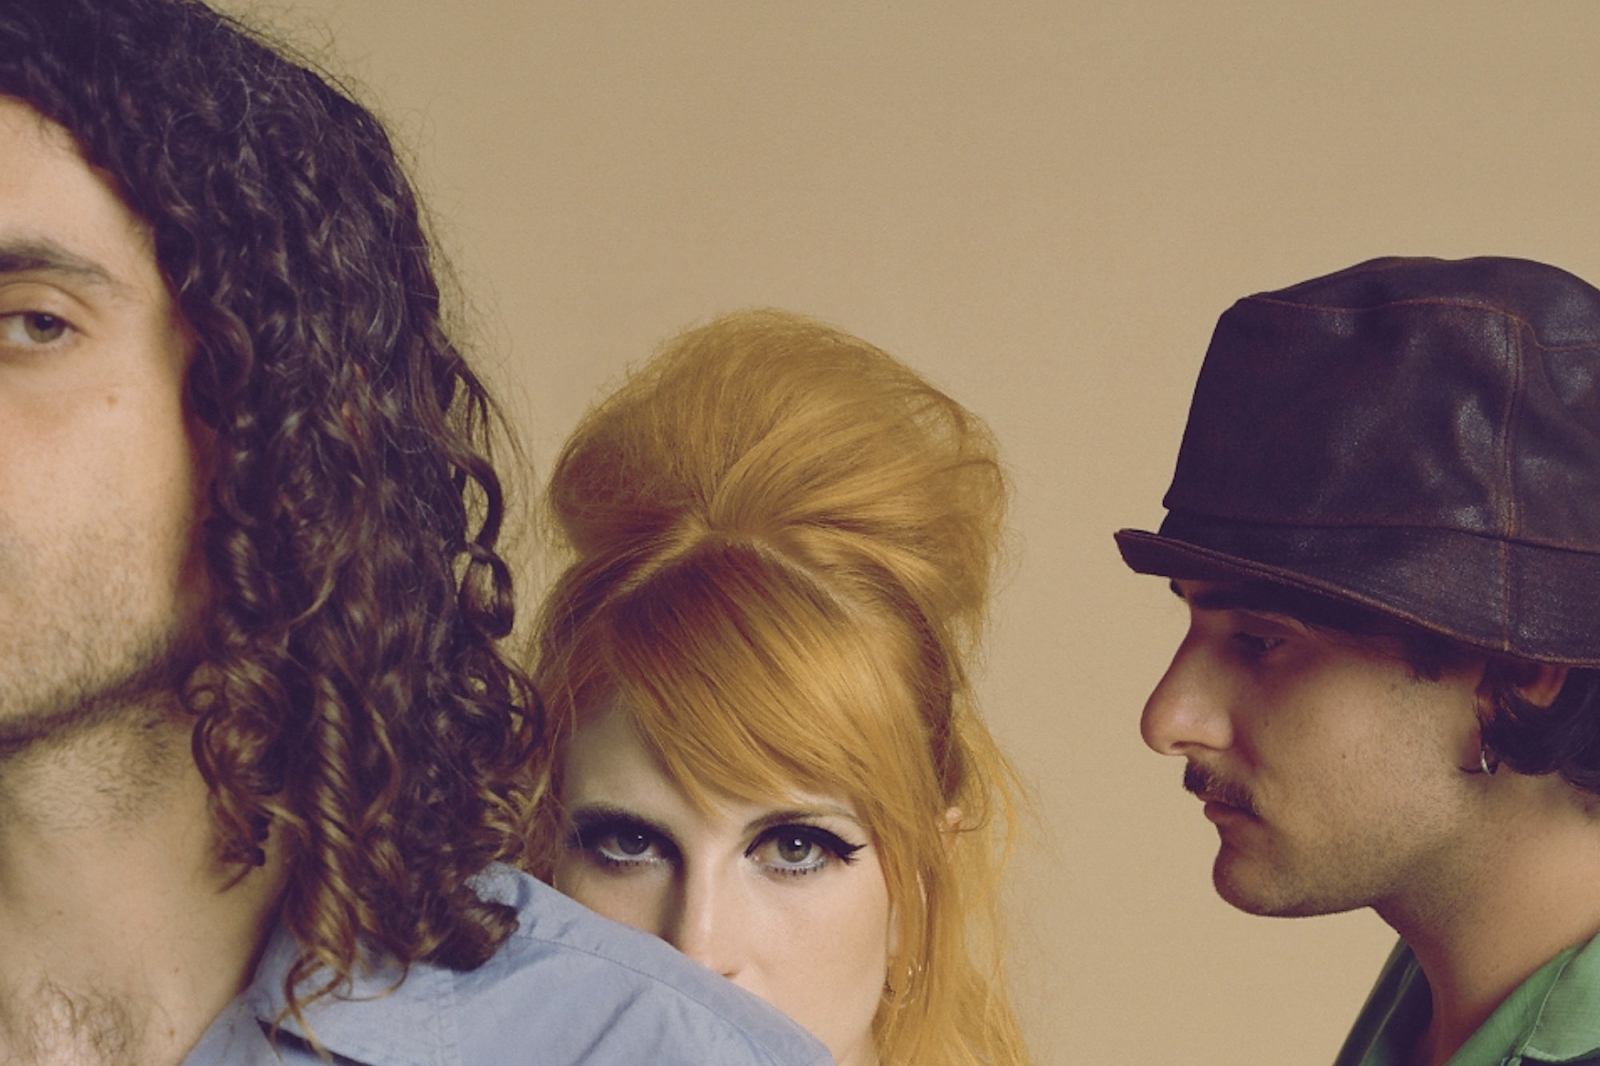 Paramore are teasing new single 'The News'